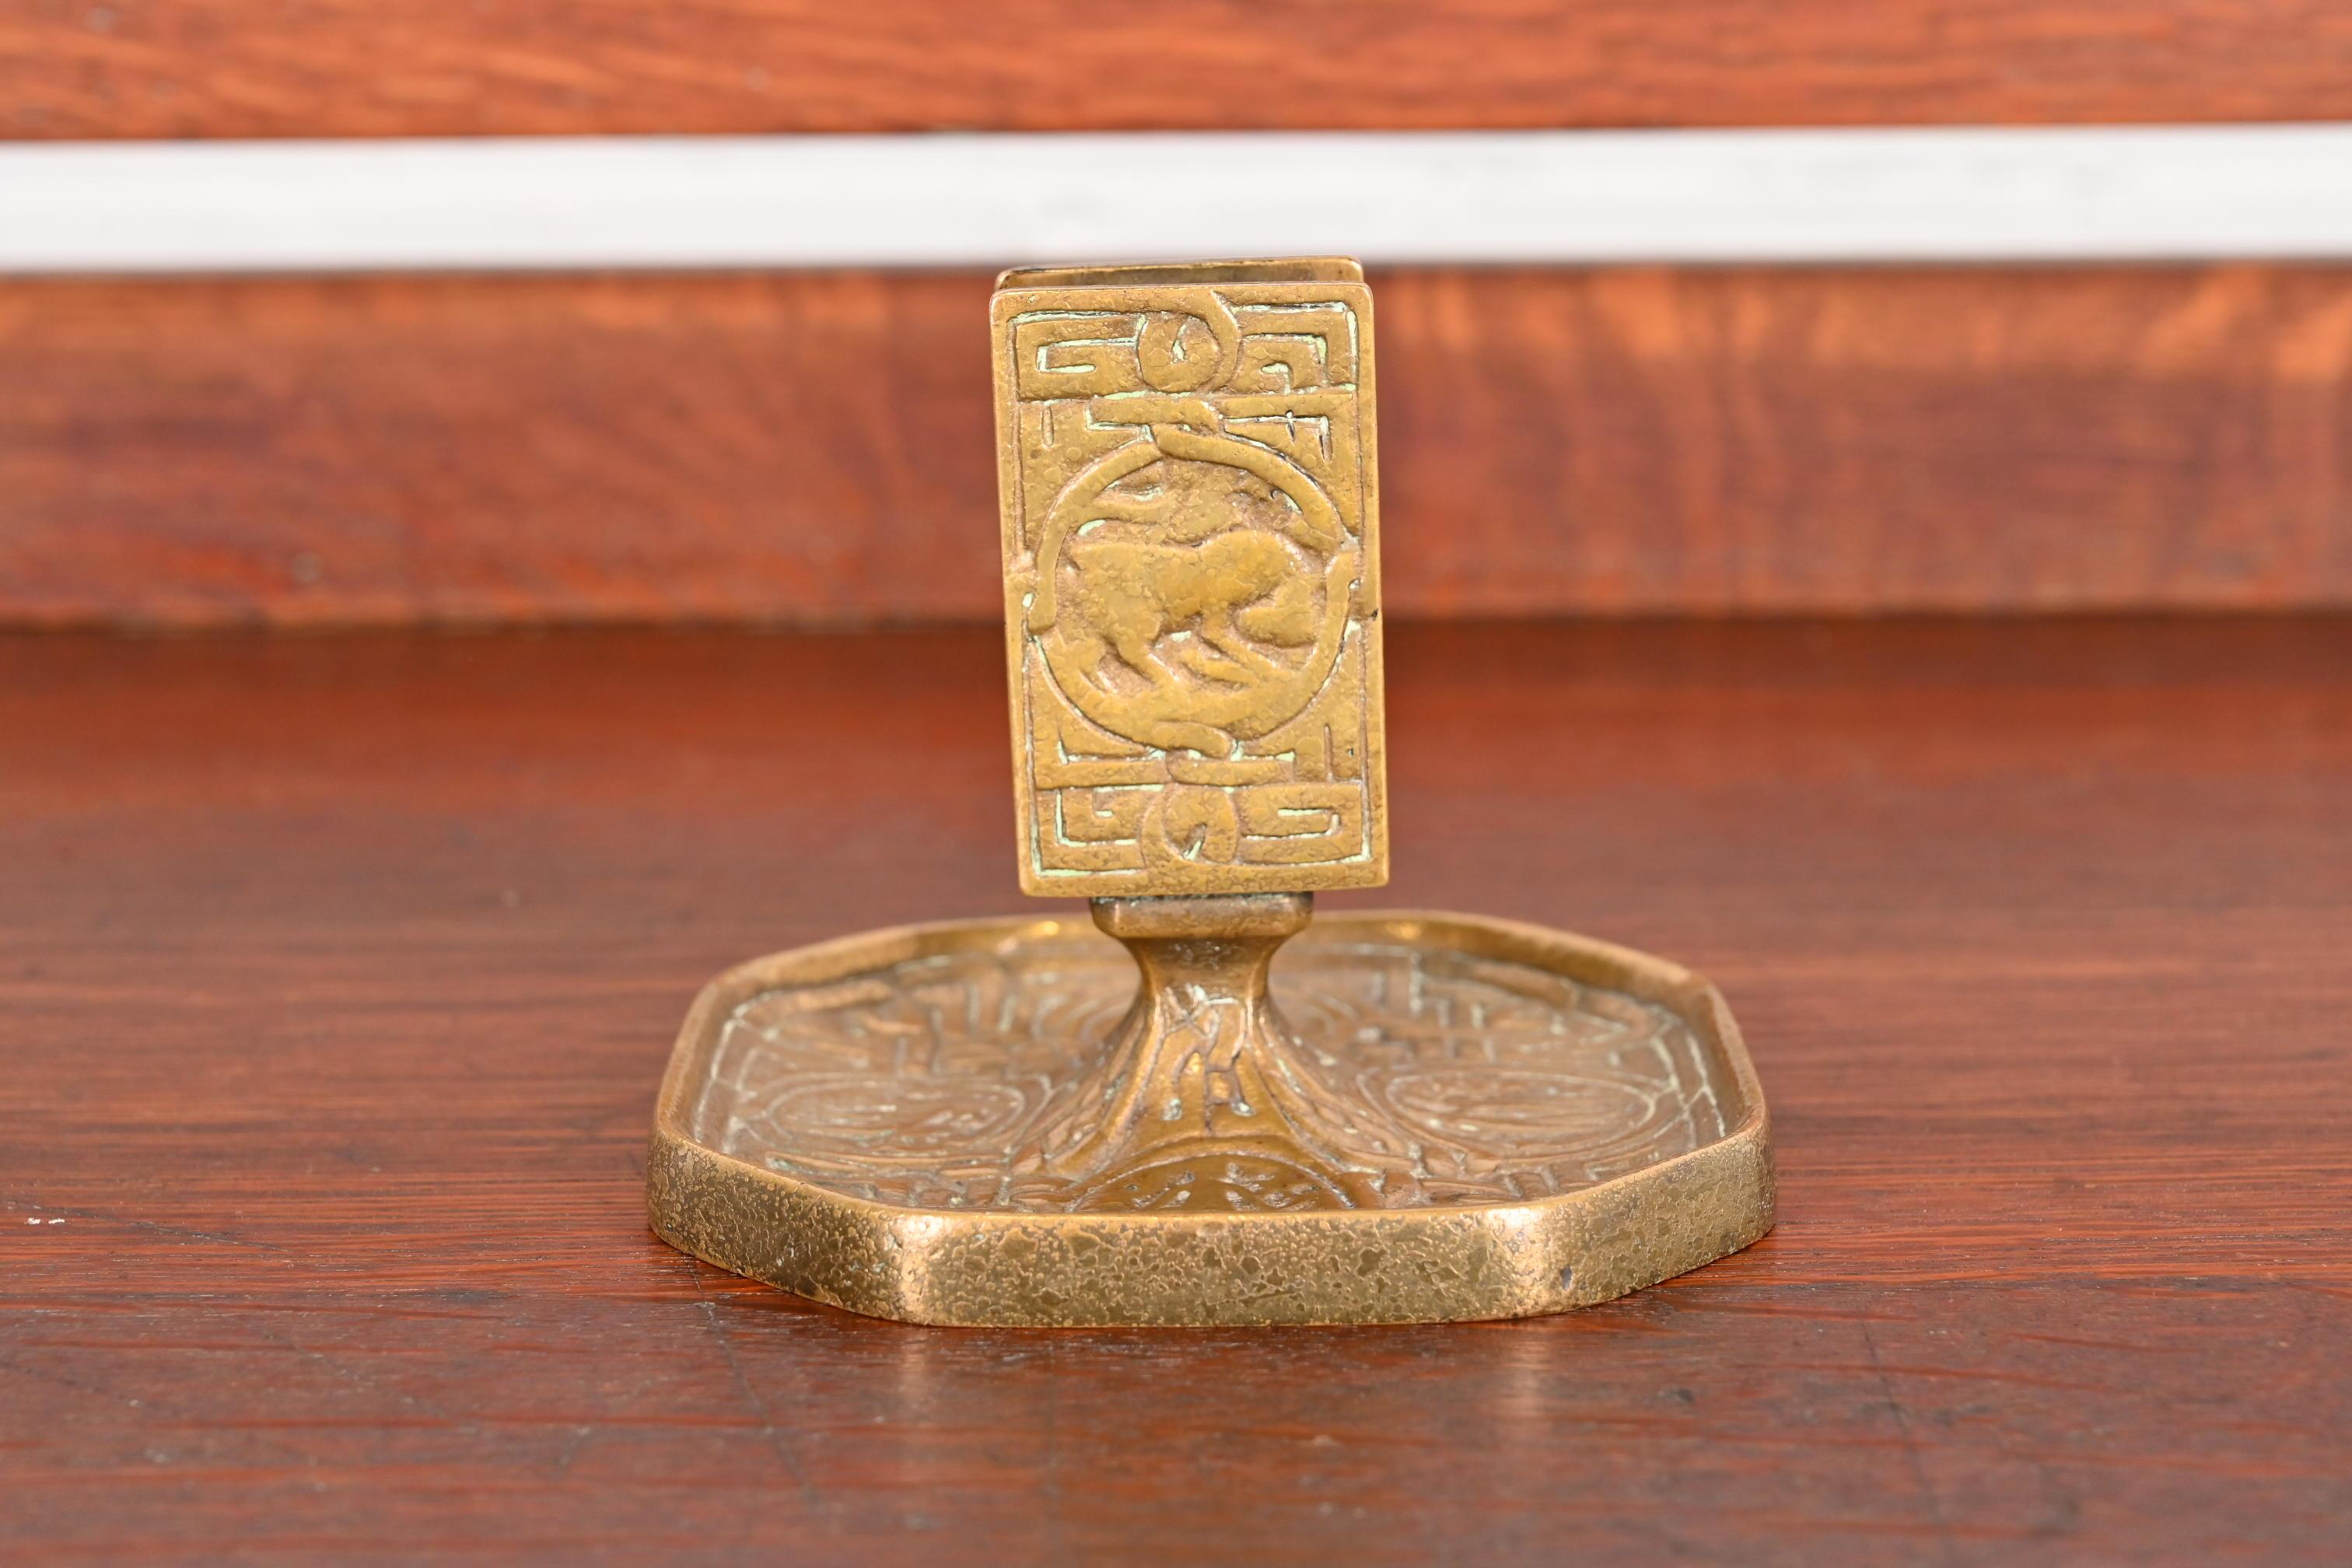 A gorgeous antique gilt bronze match box holder featuring symbols of the Zodiac

By Tiffany Studios (signed to the underside)

New York, USA, Early 20th Century

Measures: 4.5